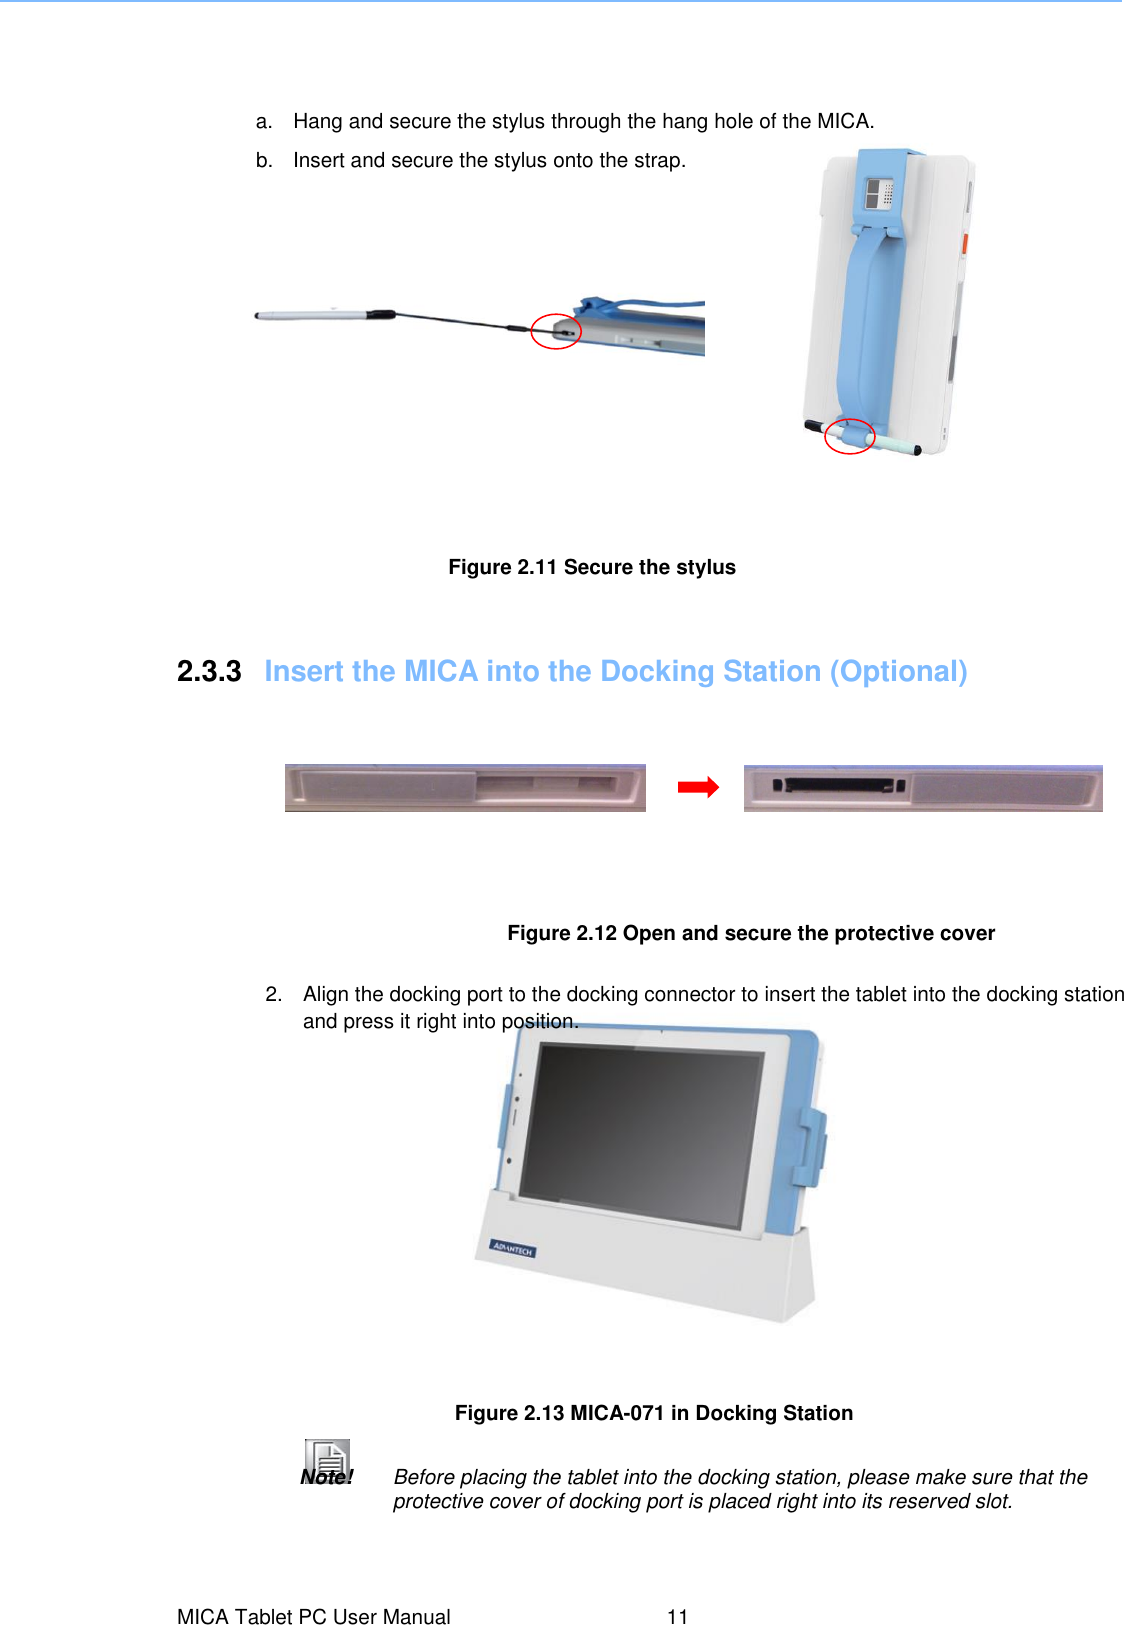 MICA Tablet PC User Manual  11 Figure 2.13 MICA-071 in Docking Station   2.  Align the docking port to the docking connector to insert the tablet into the docking station and press it right into position. Note!   Before placing the tablet into the docking station, please make sure that the protective cover of docking port is placed right into its reserved slot. Figure 2.12 Open and secure the protective cover   2.3.3  Insert the MICA into the Docking Station (Optional) Figure 2.11 Secure the stylus  a.  Hang and secure the stylus through the hang hole of the MICA. b.  Insert and secure the stylus onto the strap.  